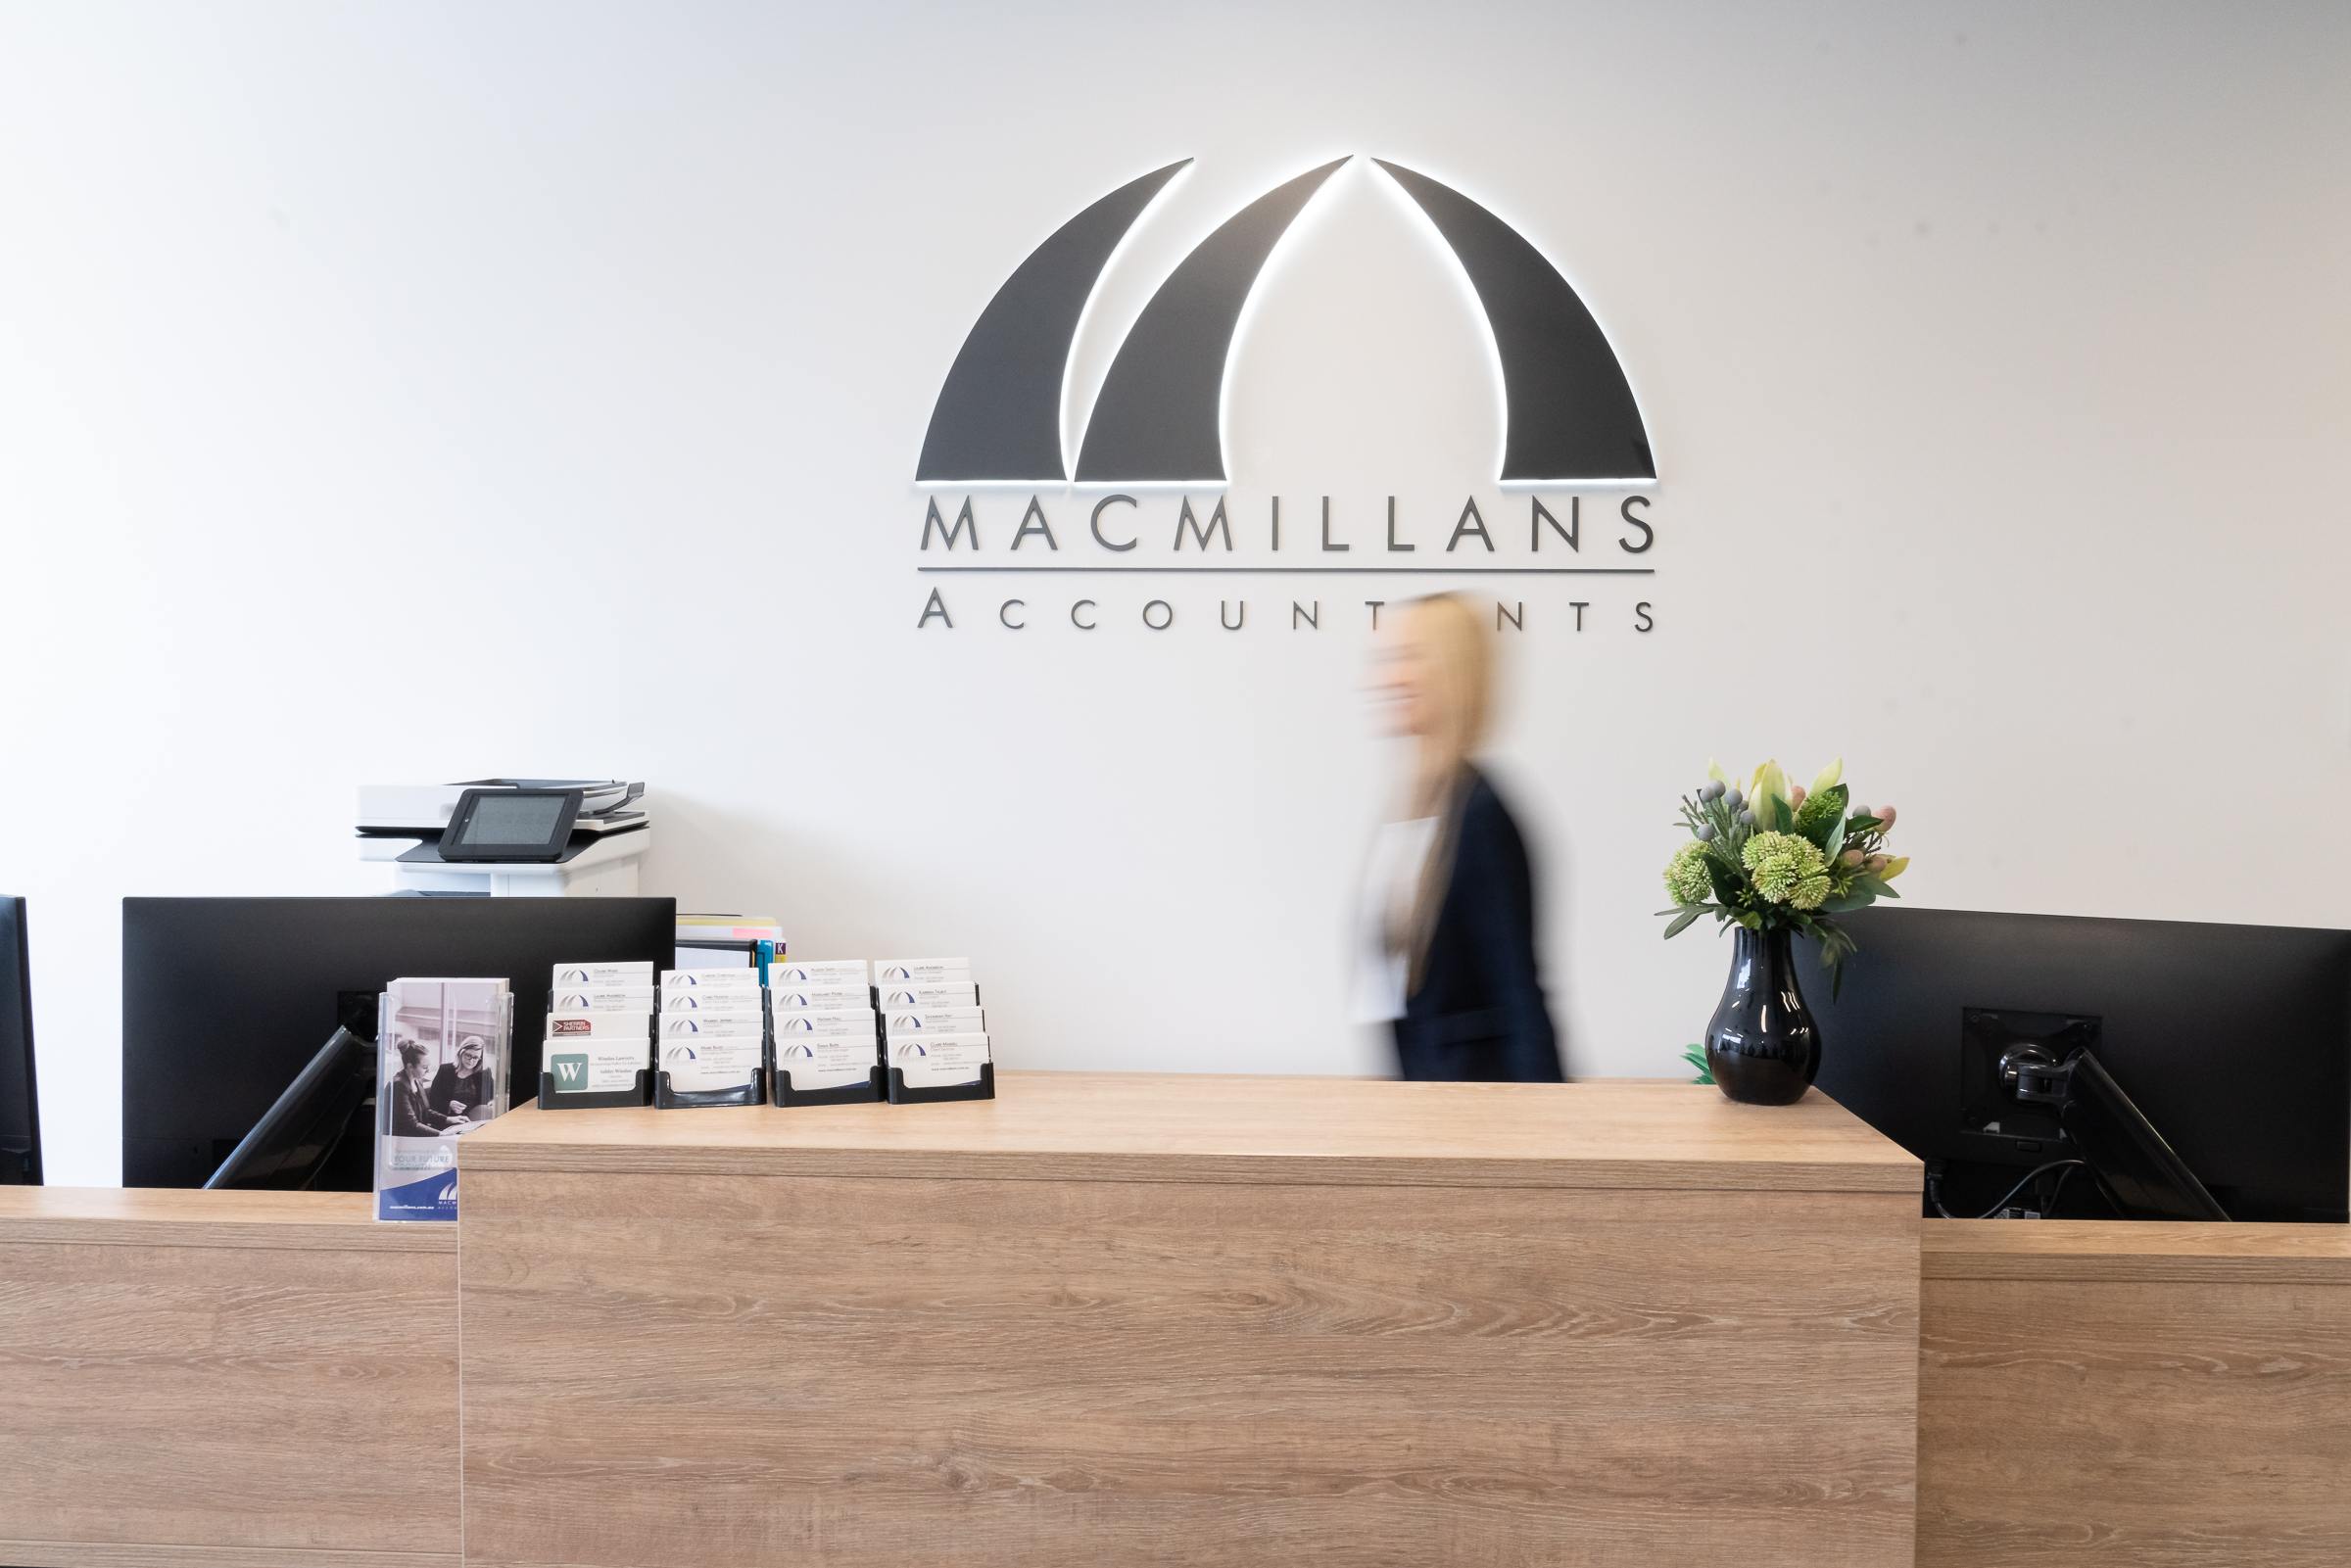 Corporate office image at MacMillan Accountants photographed by Trish Evans Photography